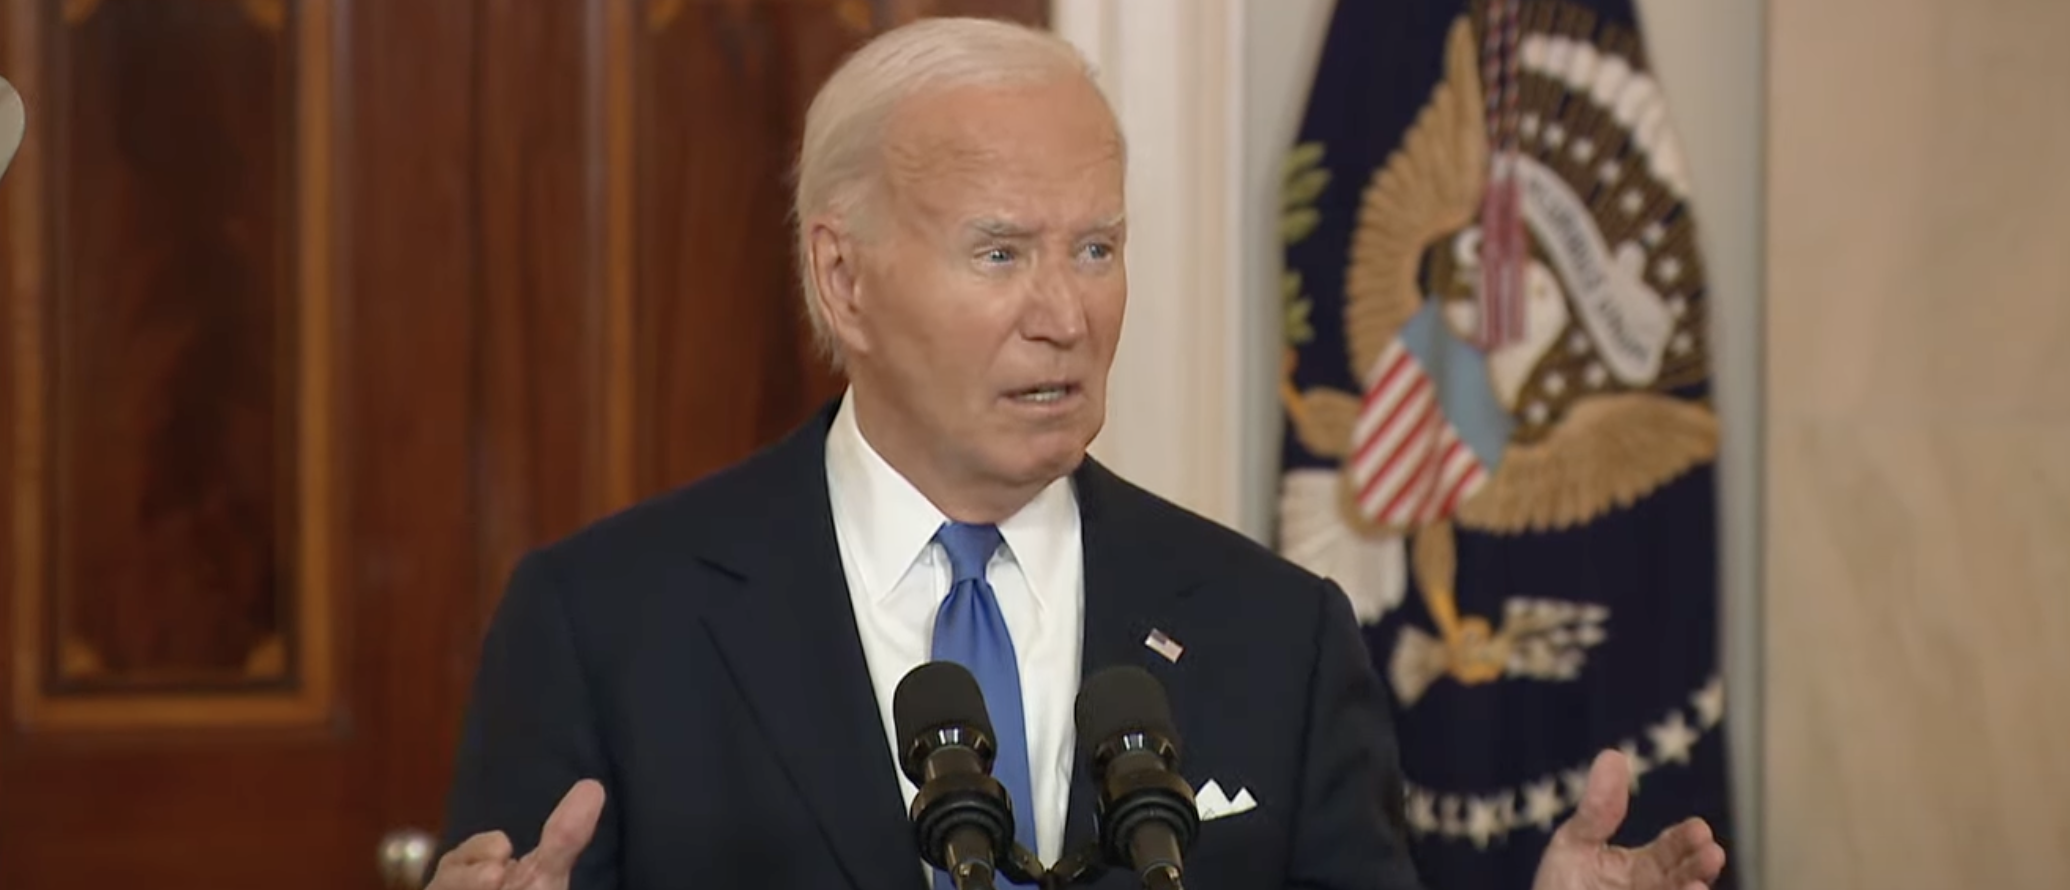 Biden Reads Teleprompter For 5 Minutes, Takes No Questions In First Major Post-Debate Appearance